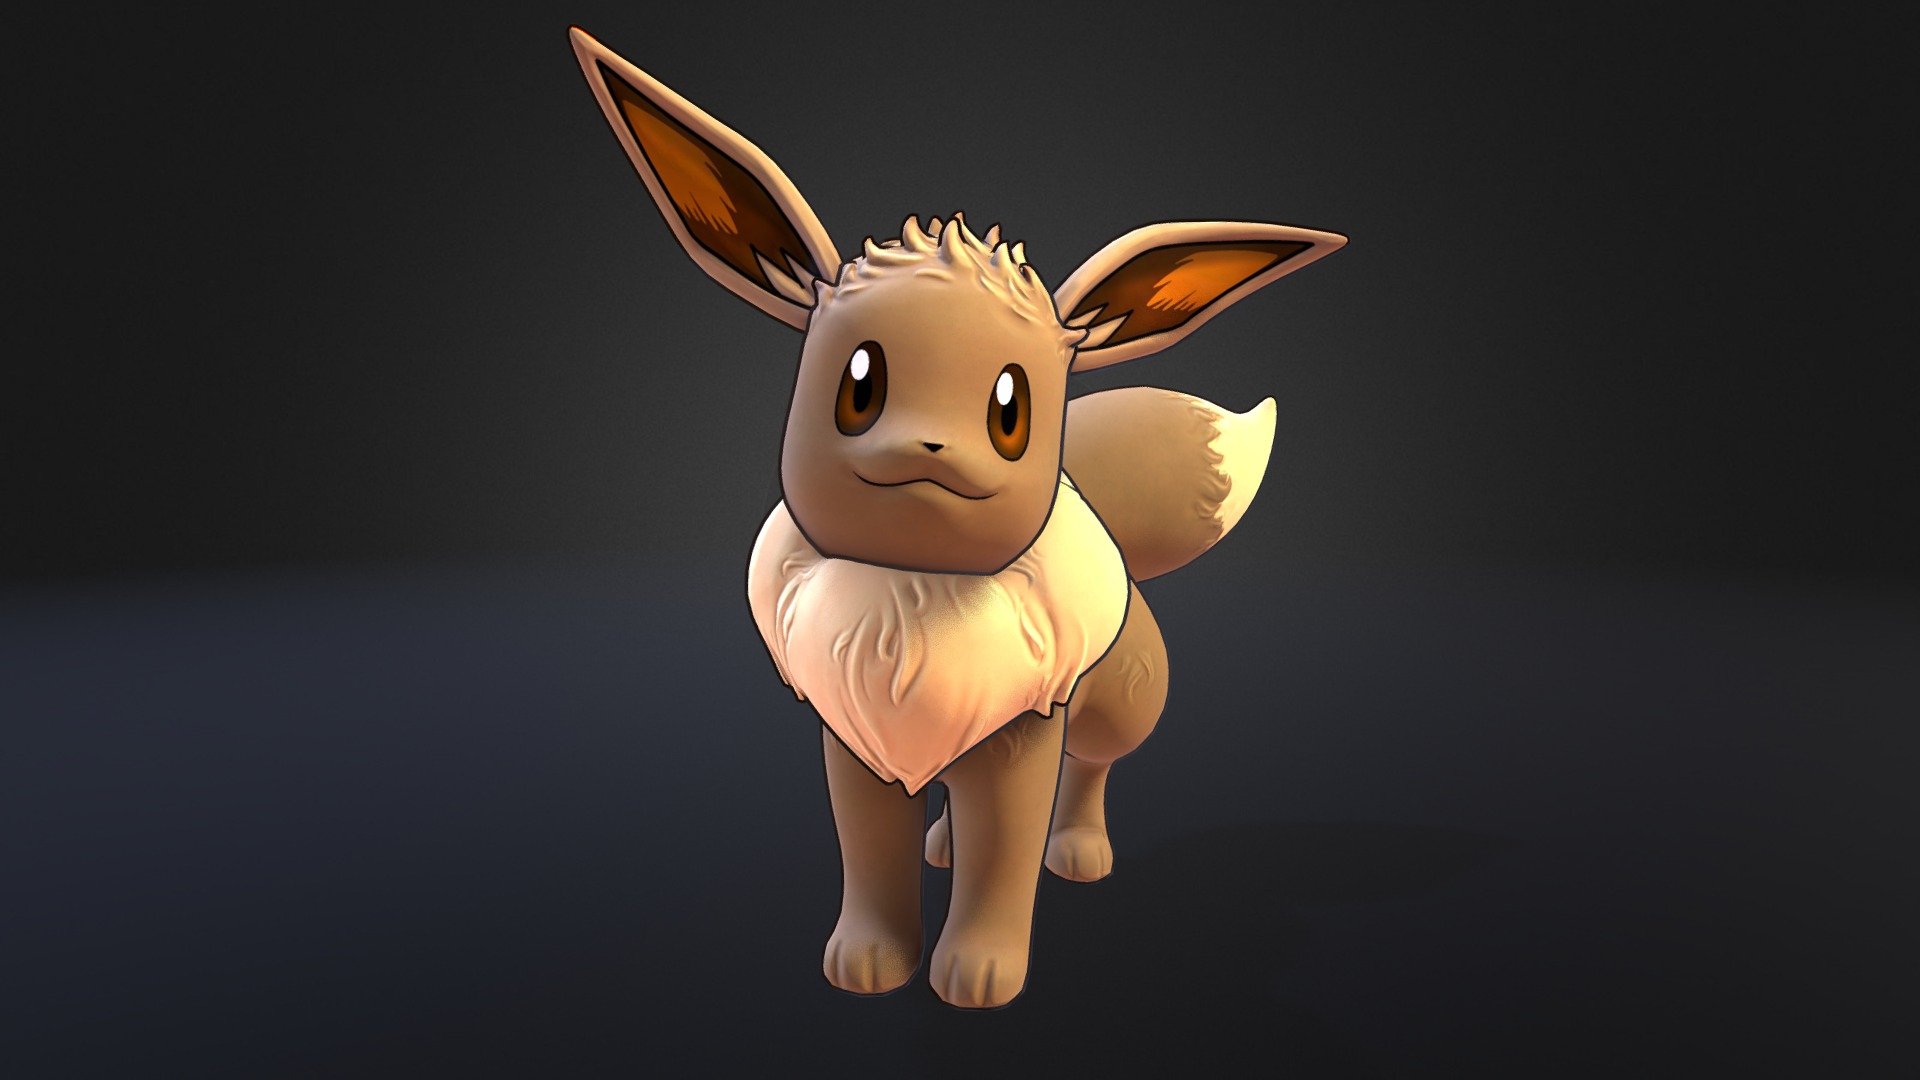 The cute but useless one. I made a making of, it's here: https://www.youtube.com/watch?v=L0tRPV8R8LQ - Eevee Pokemon - 3D model by 3dlogicus 3d model